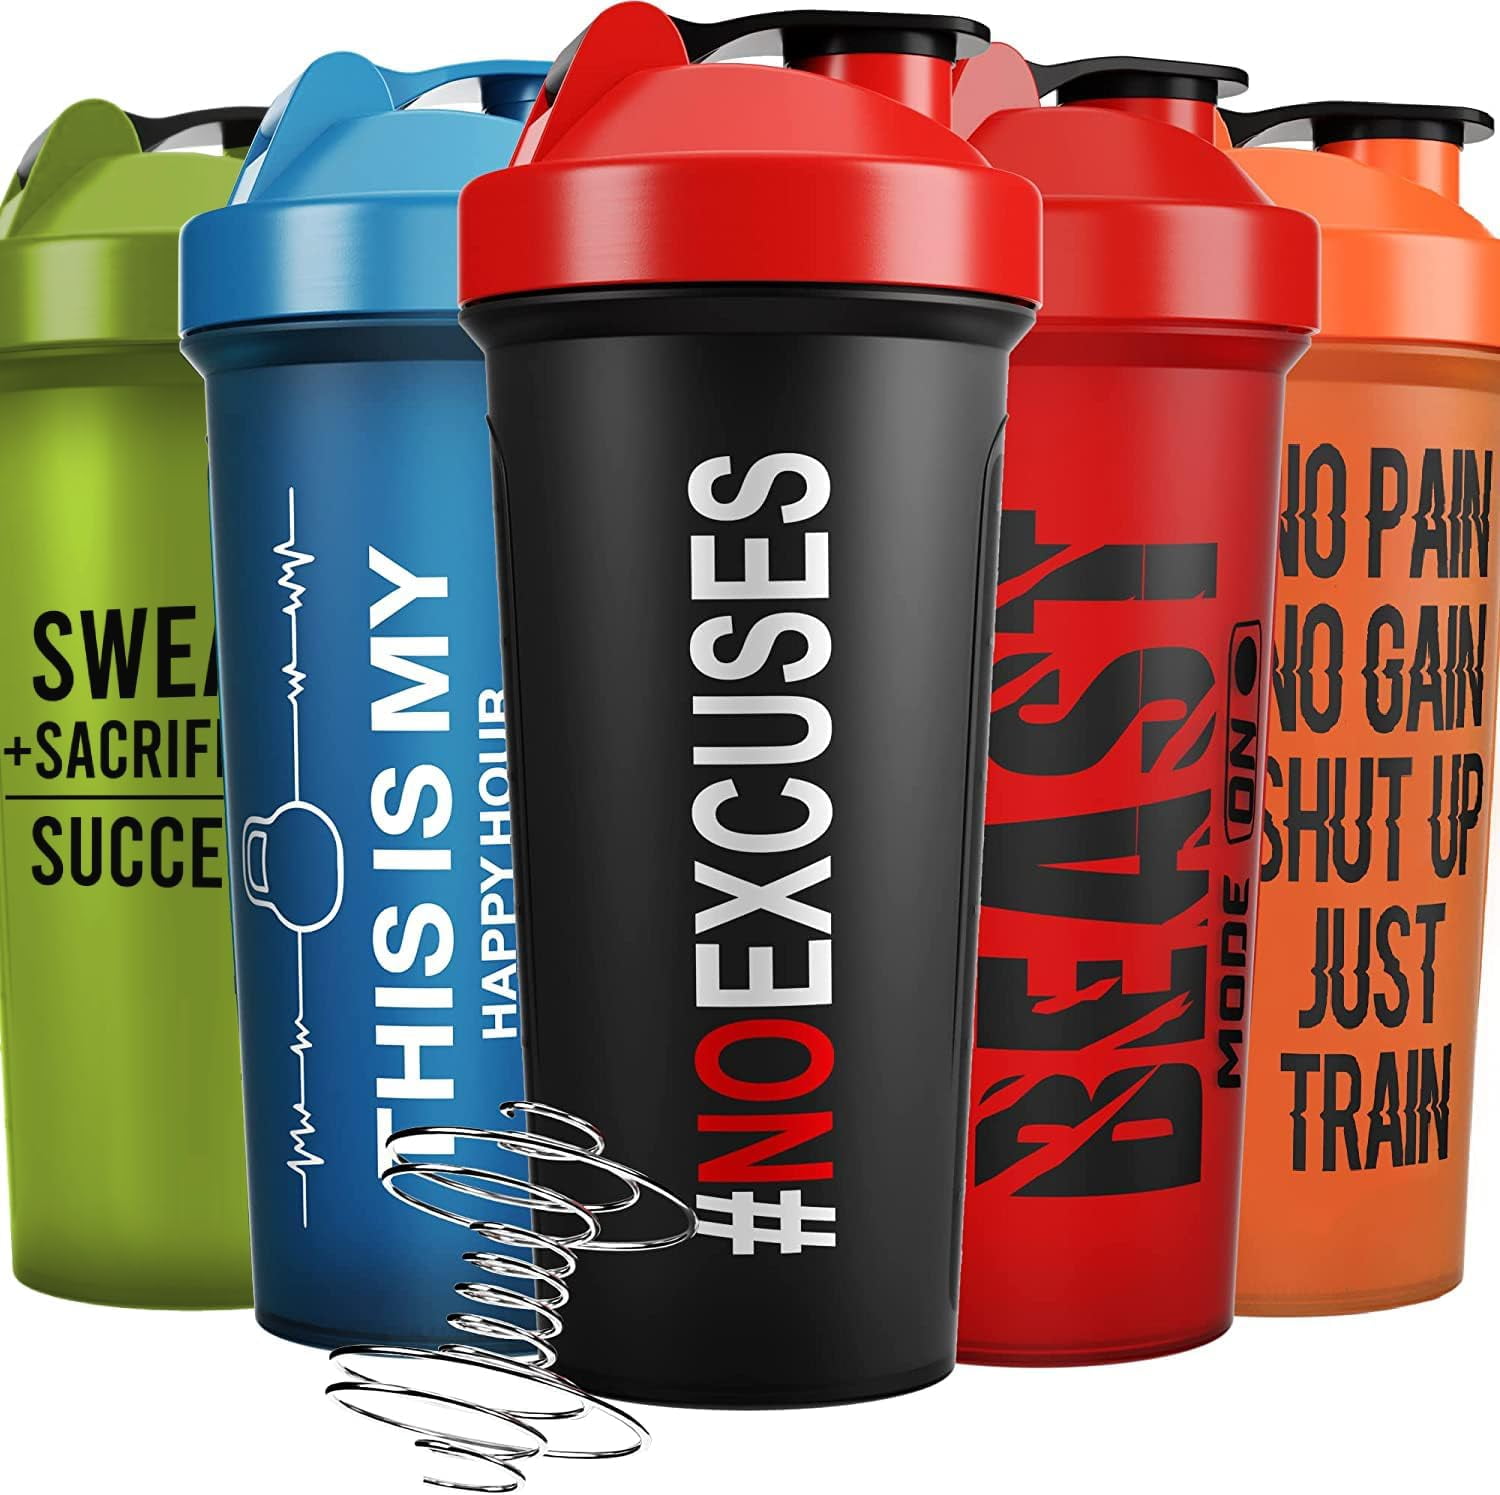 We Reviewed The 5 Best Protein Shaker Bottles, Here's What We Found